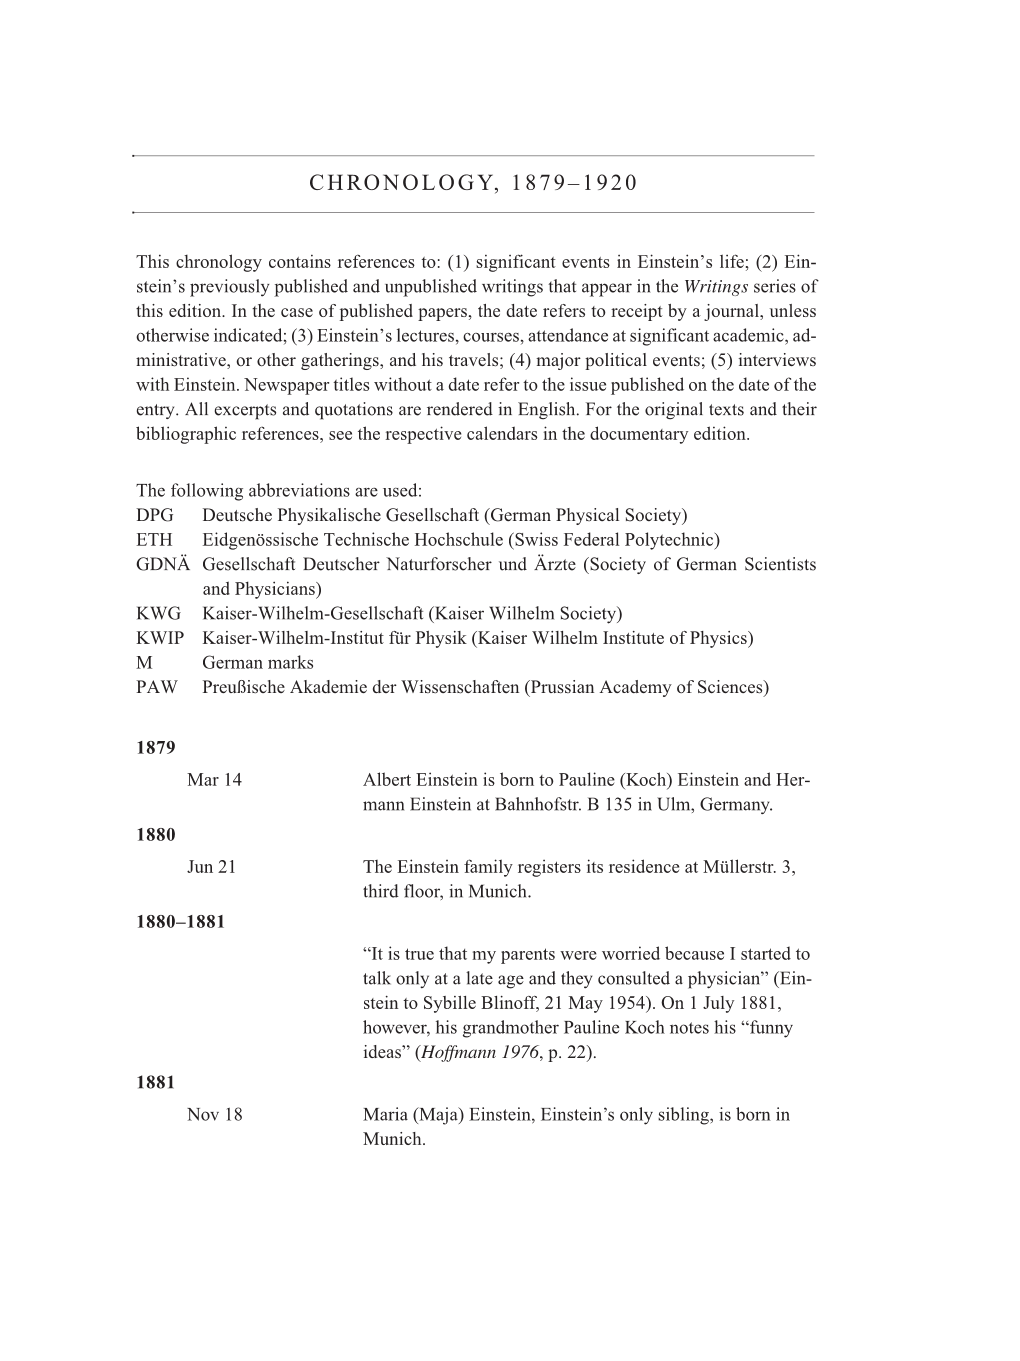 Volume 11: Cumulative Index, Bibliography, List of Correspondence, Chronology, and Errata to Volumes 1-10 page 175